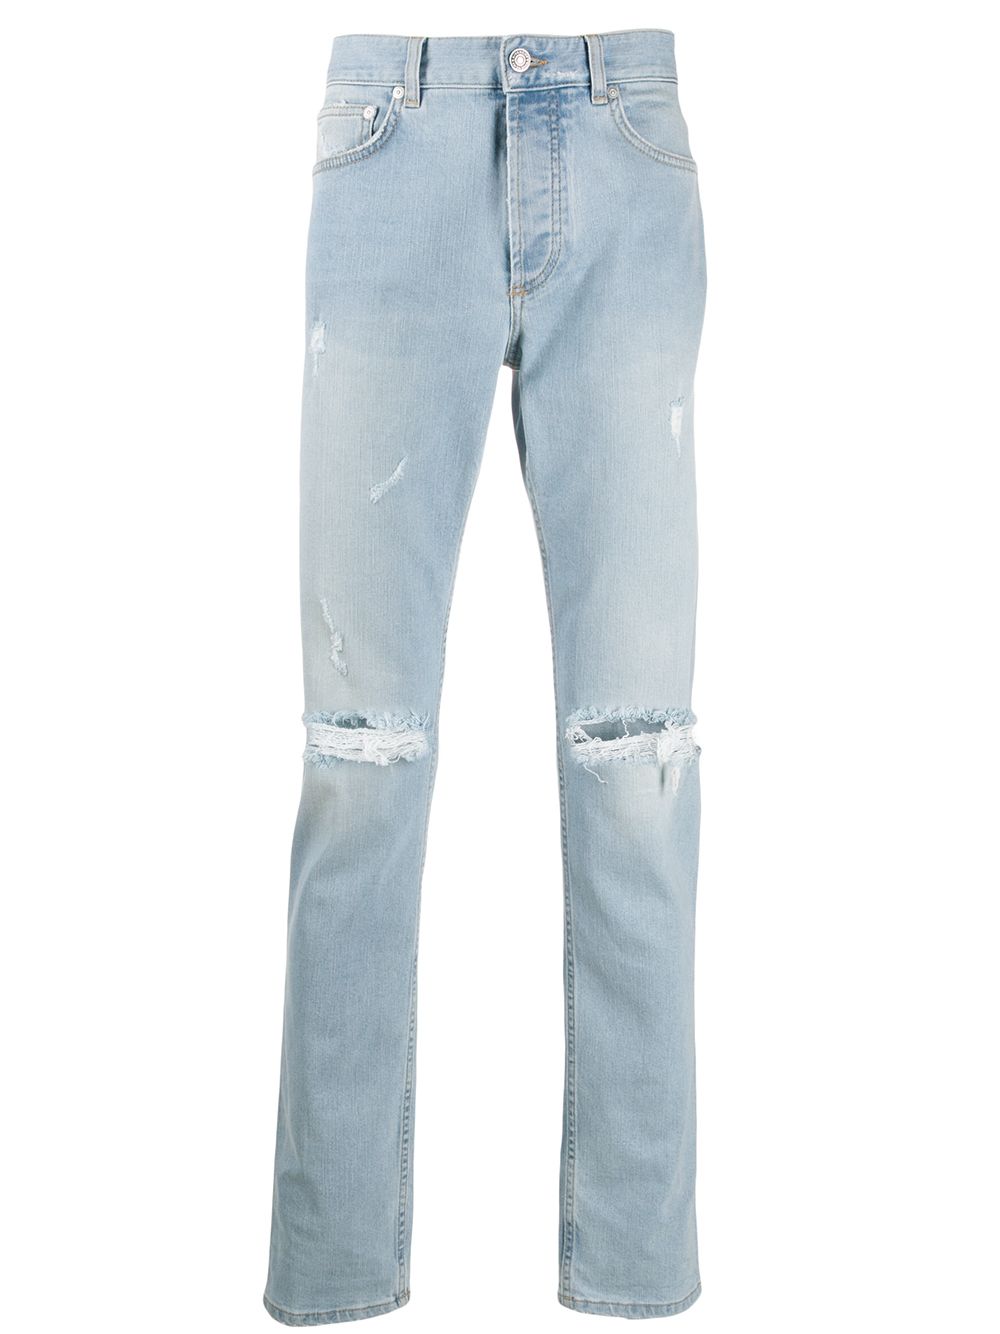 givenchy distressed jeans